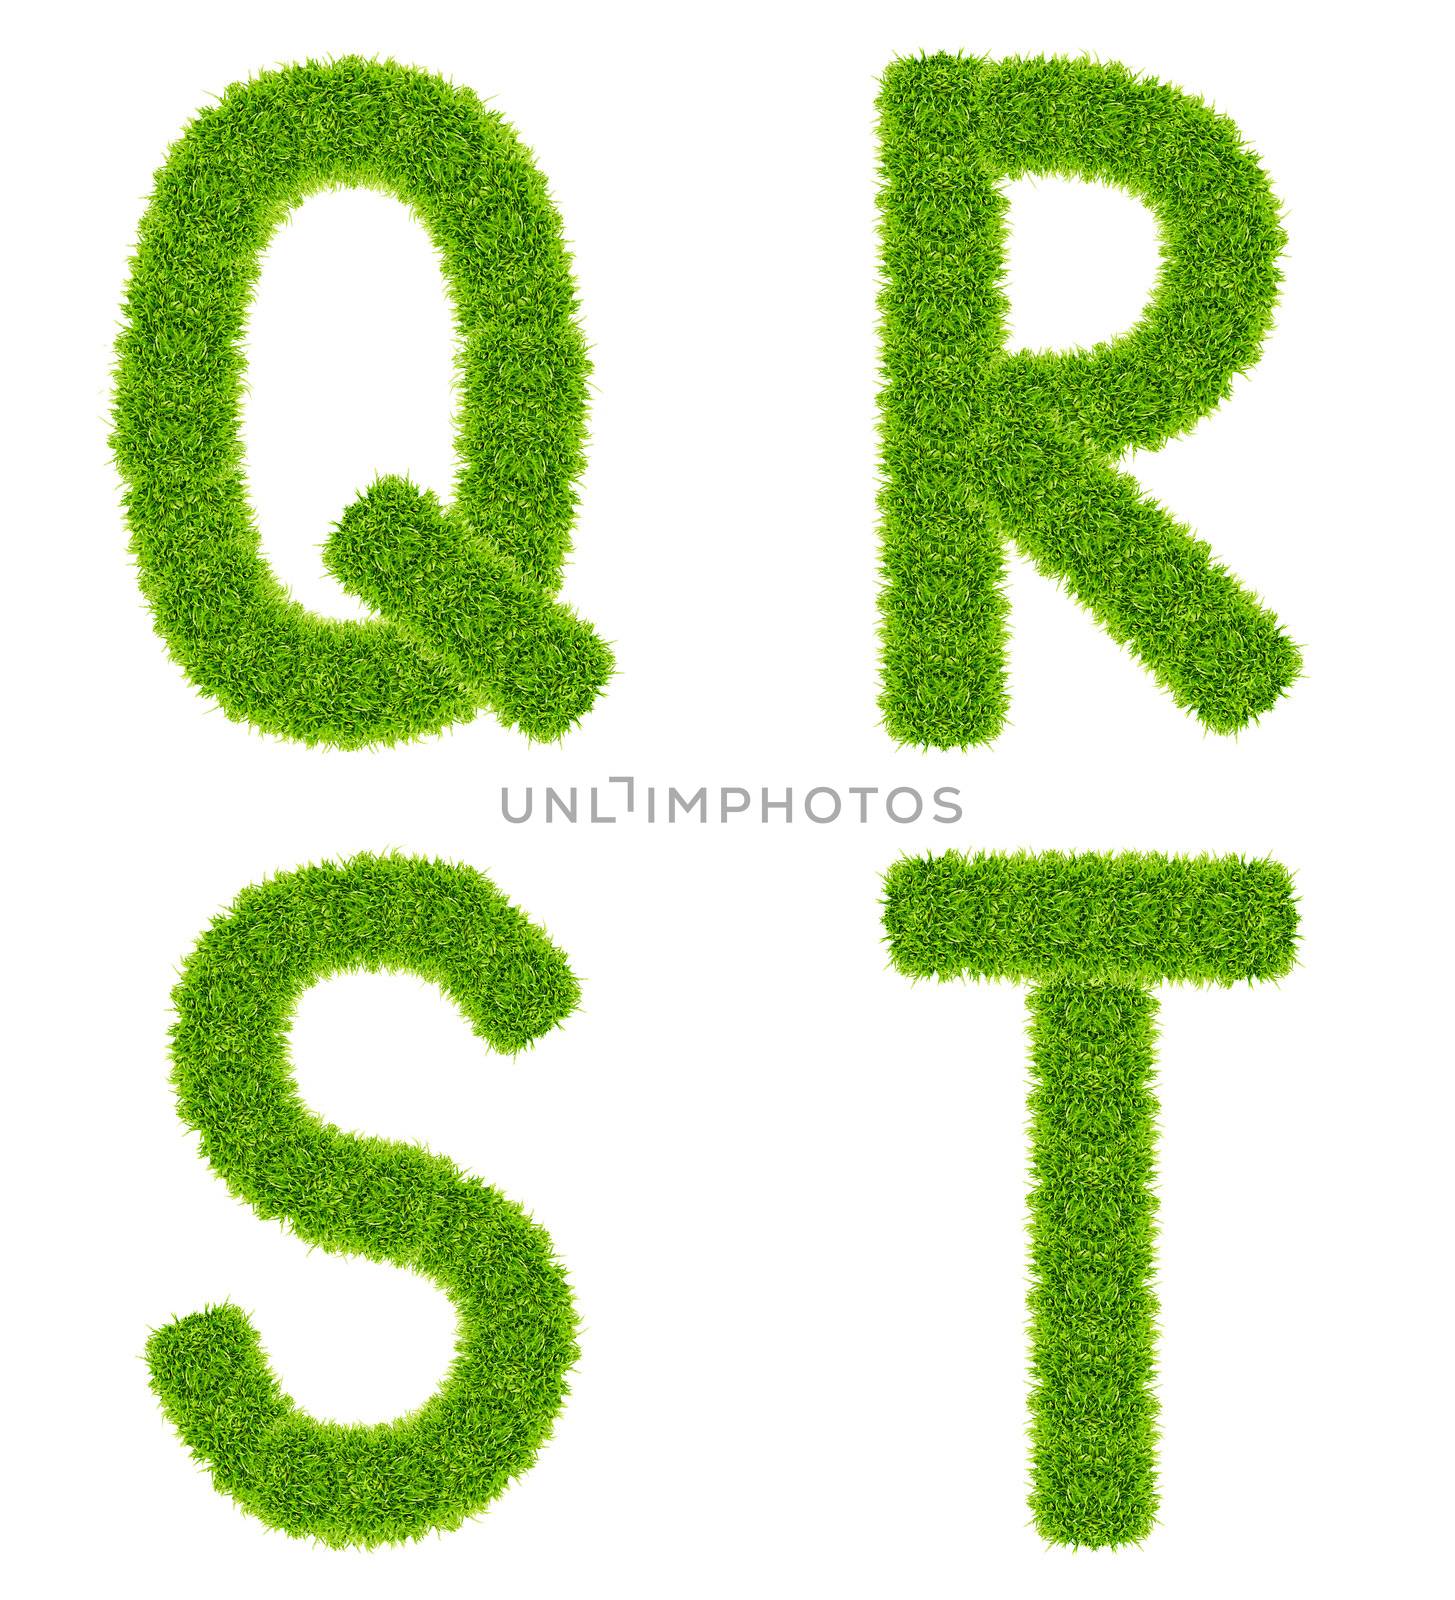 green grass letter qrst isolated by tungphoto